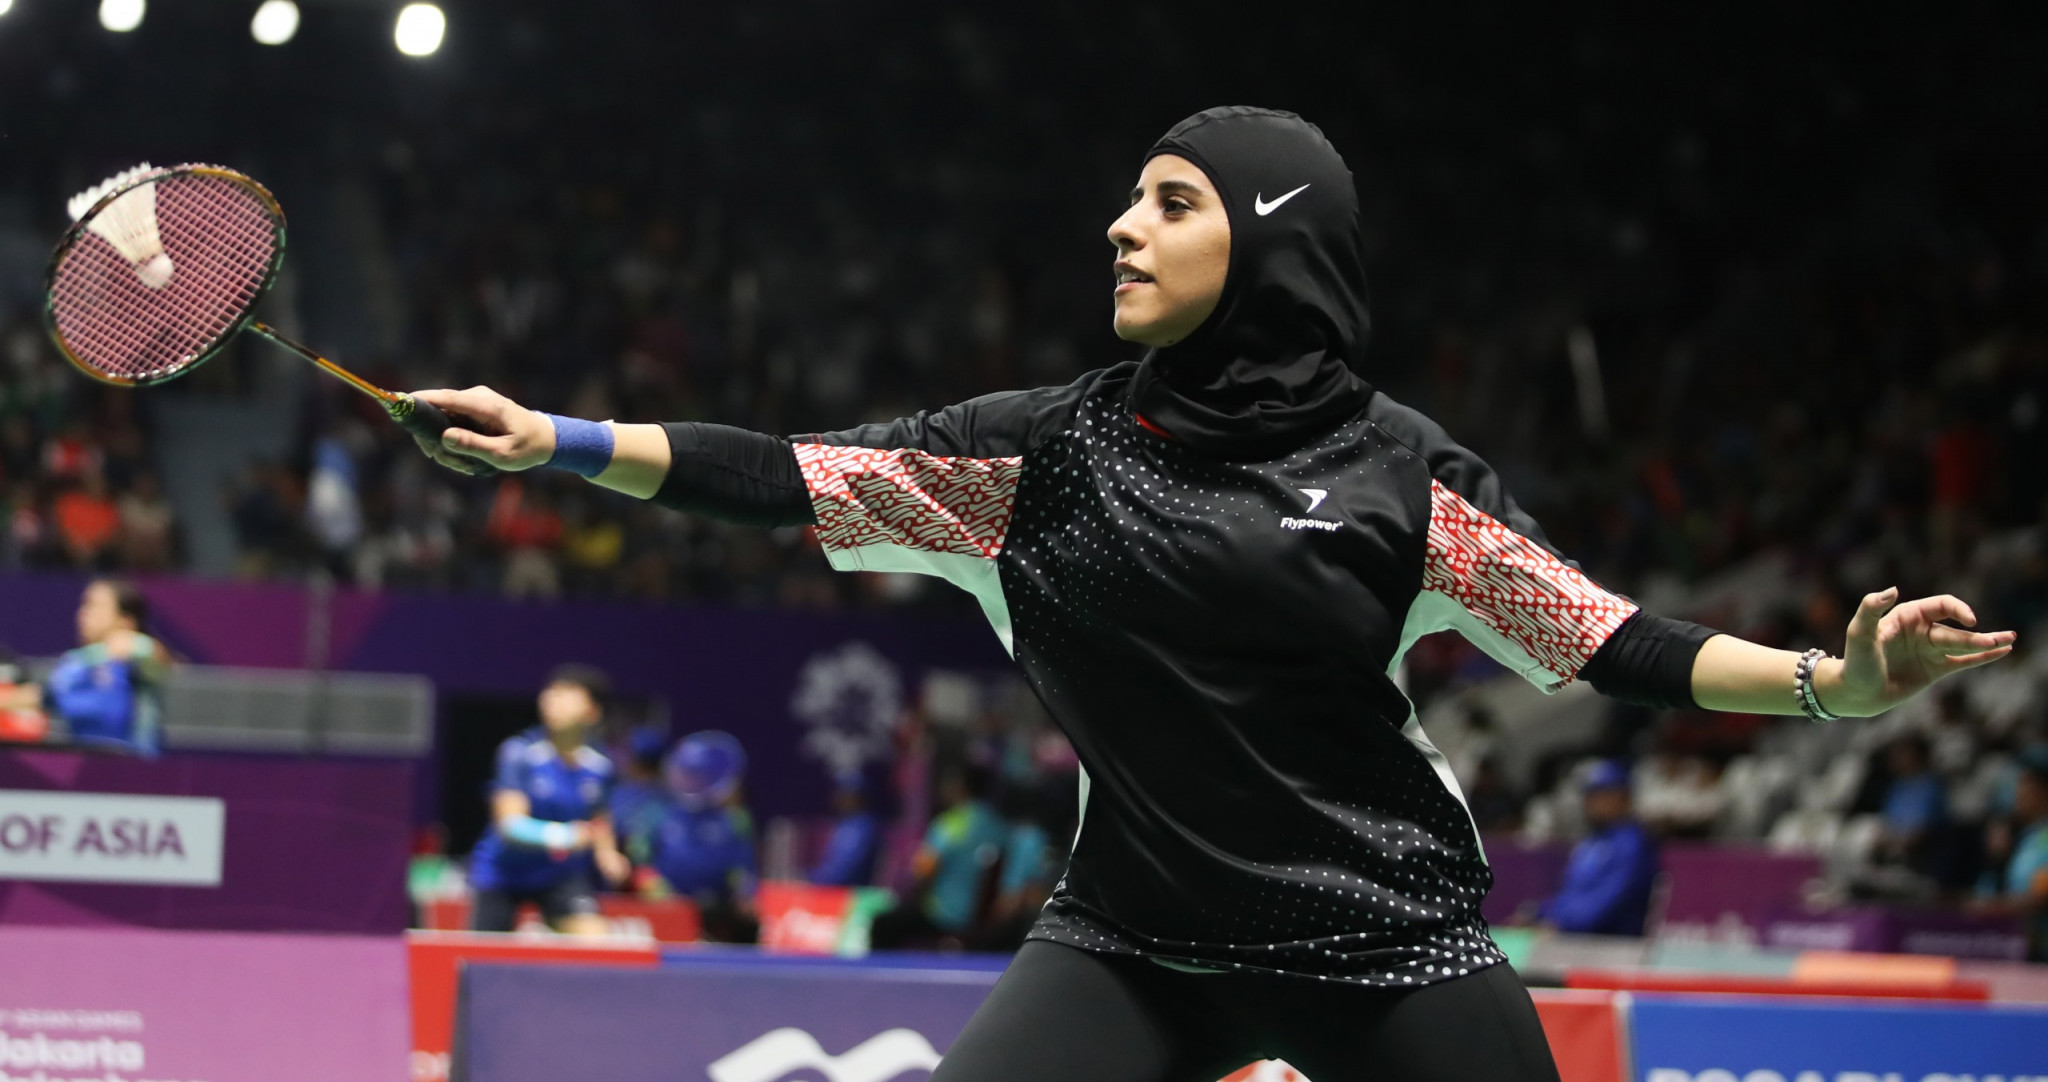 Arab Badminton Federation's online initiatives during pandemic surpass expectations